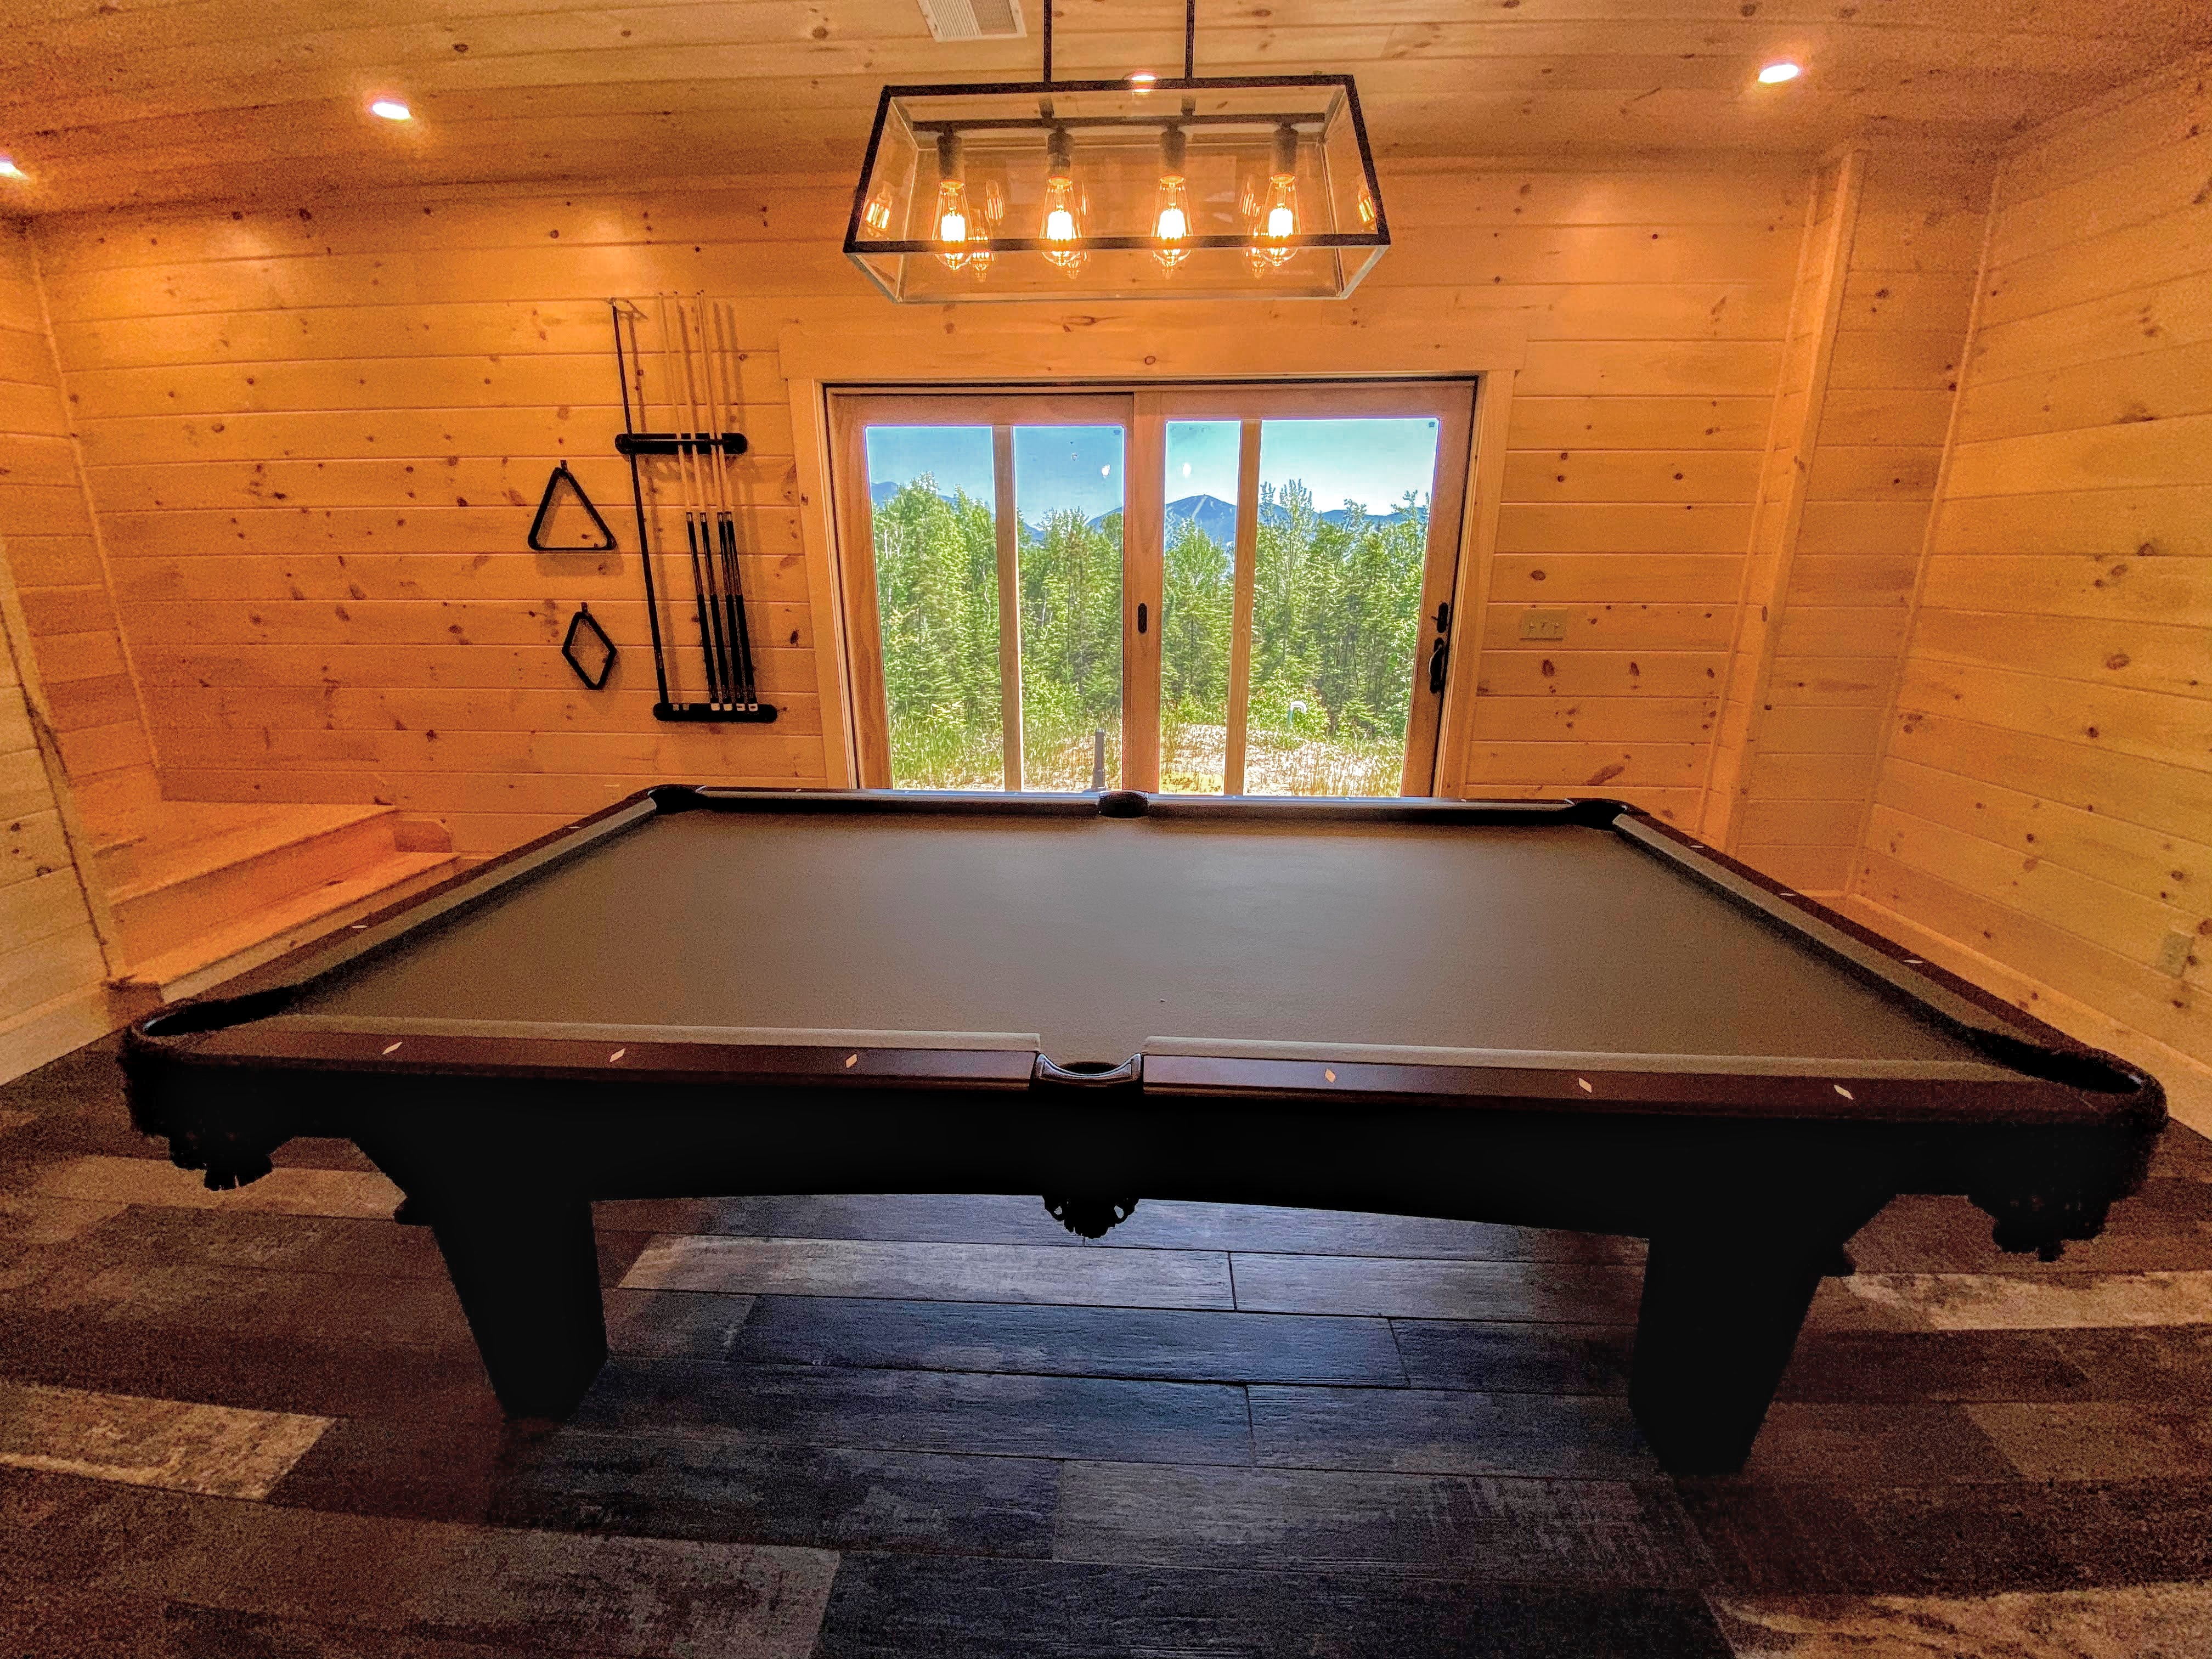 The pool table in the lower level area and access to the back yard!